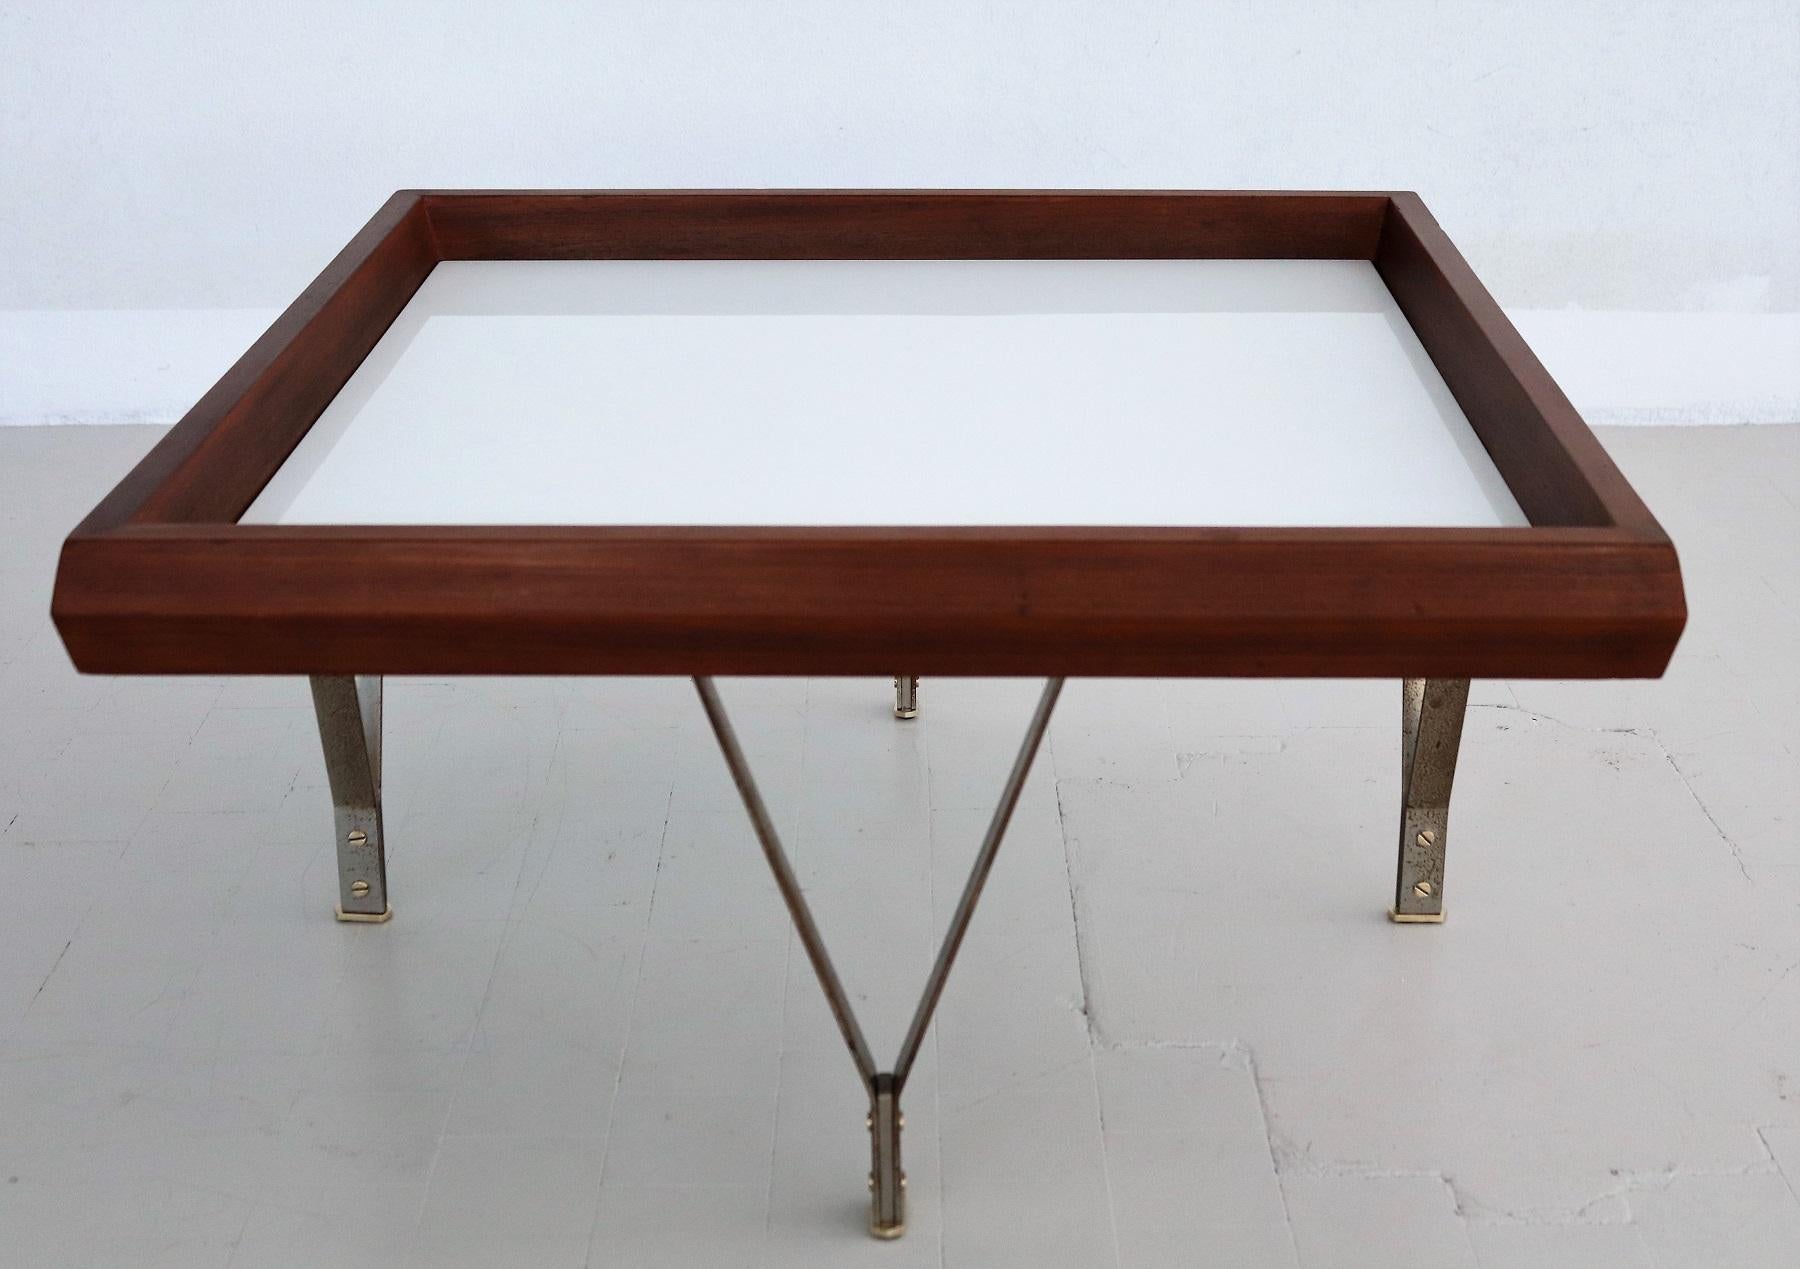 Gorgeous particular low sofa table from the Italian mid-century, approx. 1960s.
Reminds to the style of Ico Parisi.
The full mahogany table frame is based on a metal base with stainless steel legs and brass feet.
Inside the mahogany frame a white